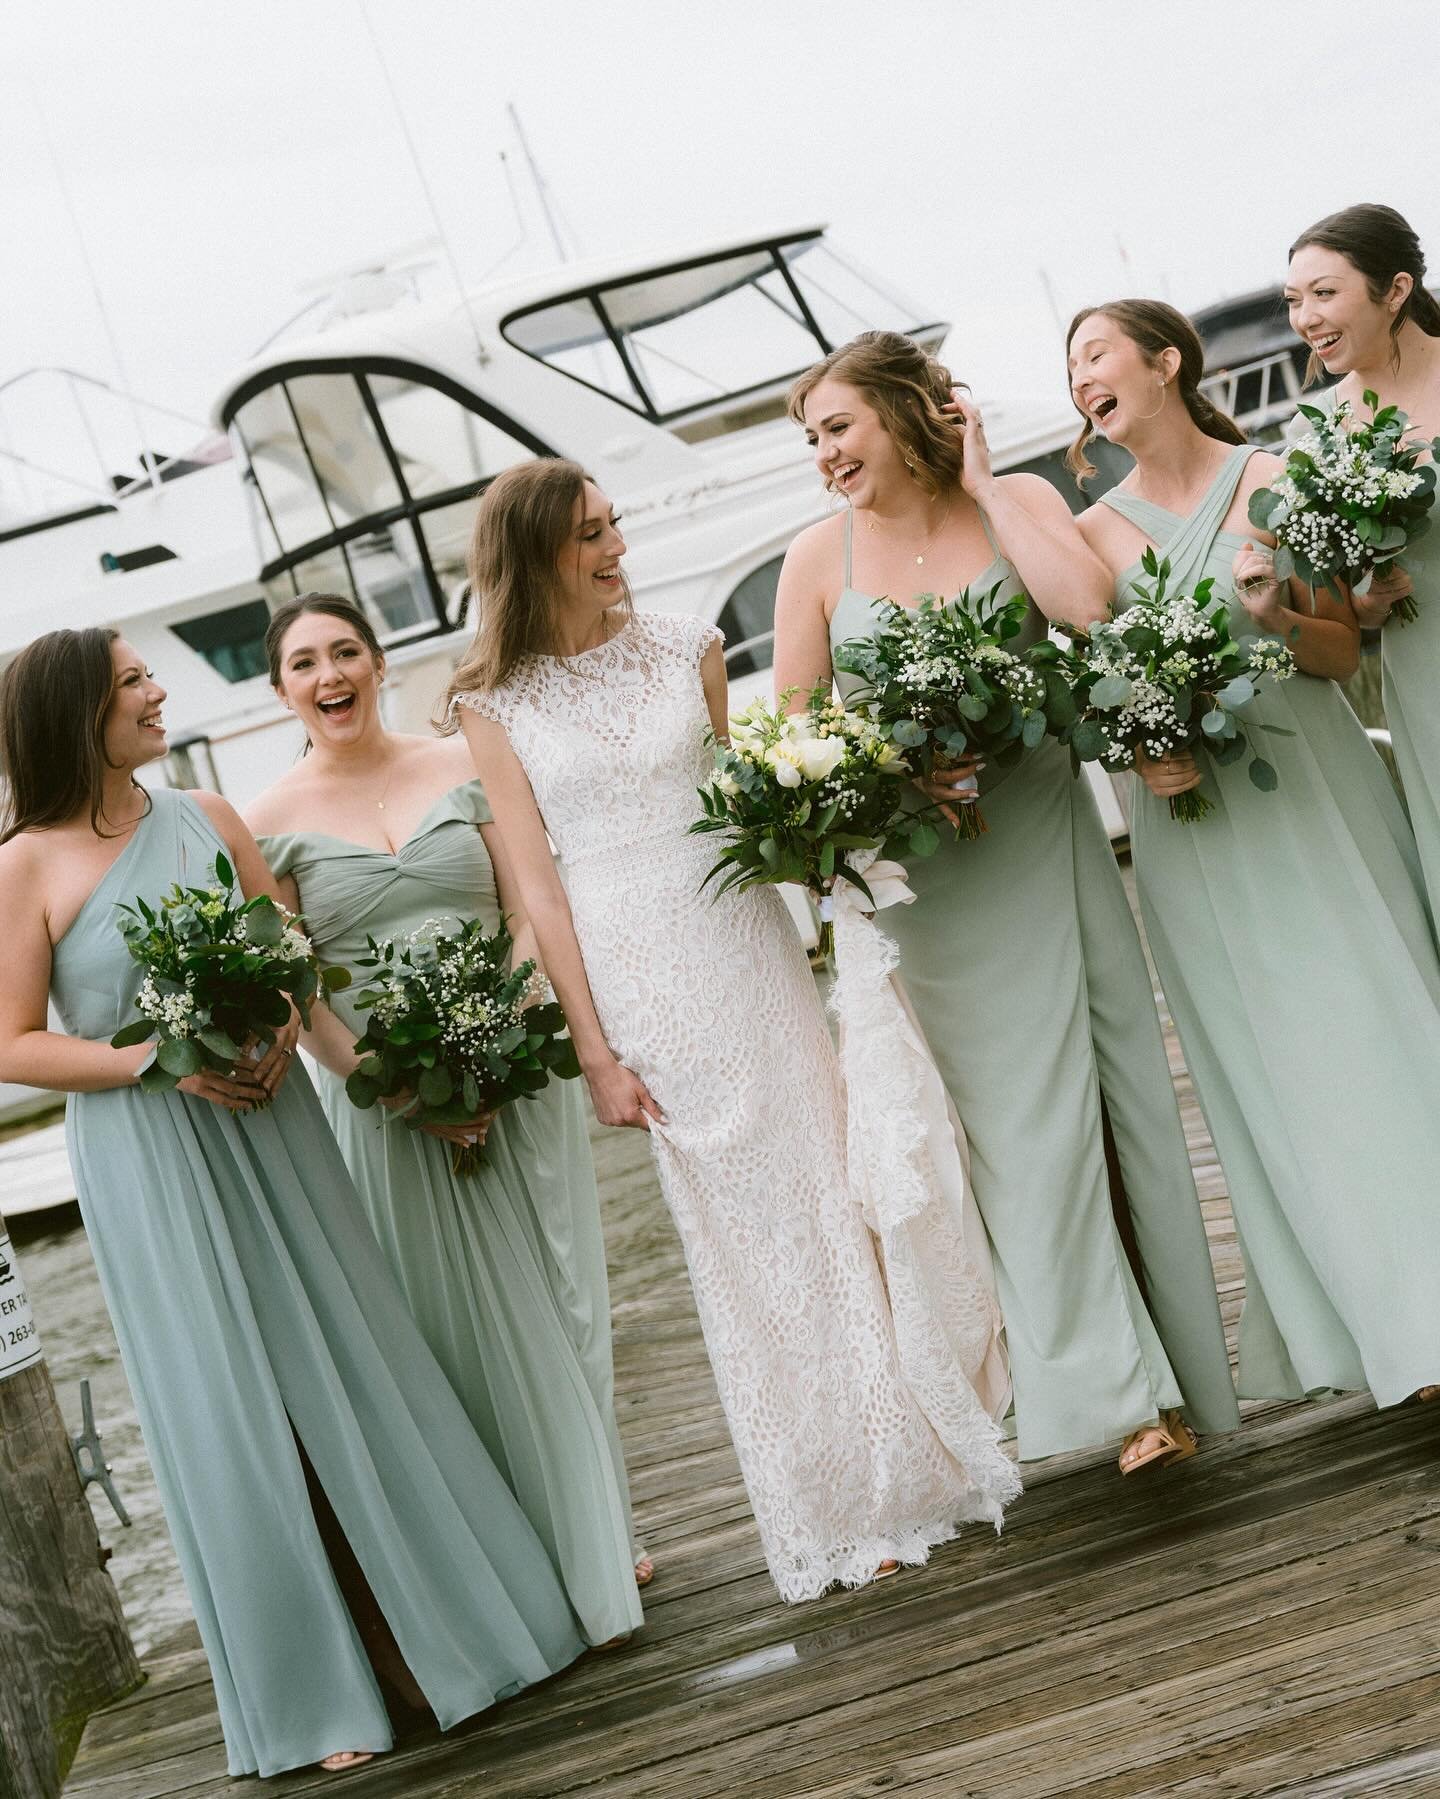 a bridesmaids moment on the dock 🤌🏽

SS for @theanchorstudio 

documentary wedding photographer, intimate weddings, NC wedding photographer, 2025 bride, east coast weddings, raleigh wedding photography